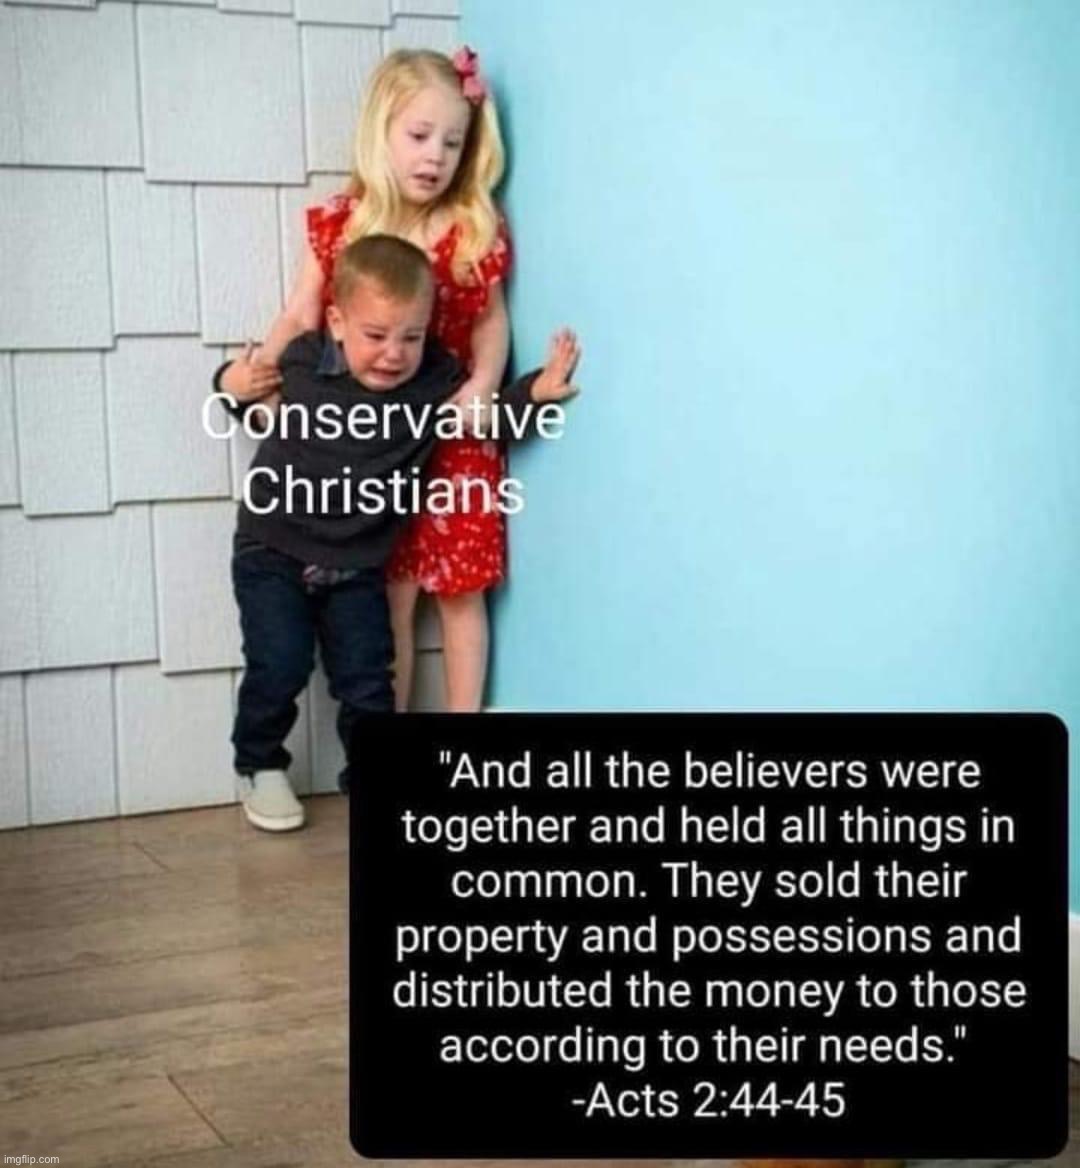 Conservative Christians vs. acts 2:44-45 | image tagged in conservative christians vs acts 2 44-45 | made w/ Imgflip meme maker